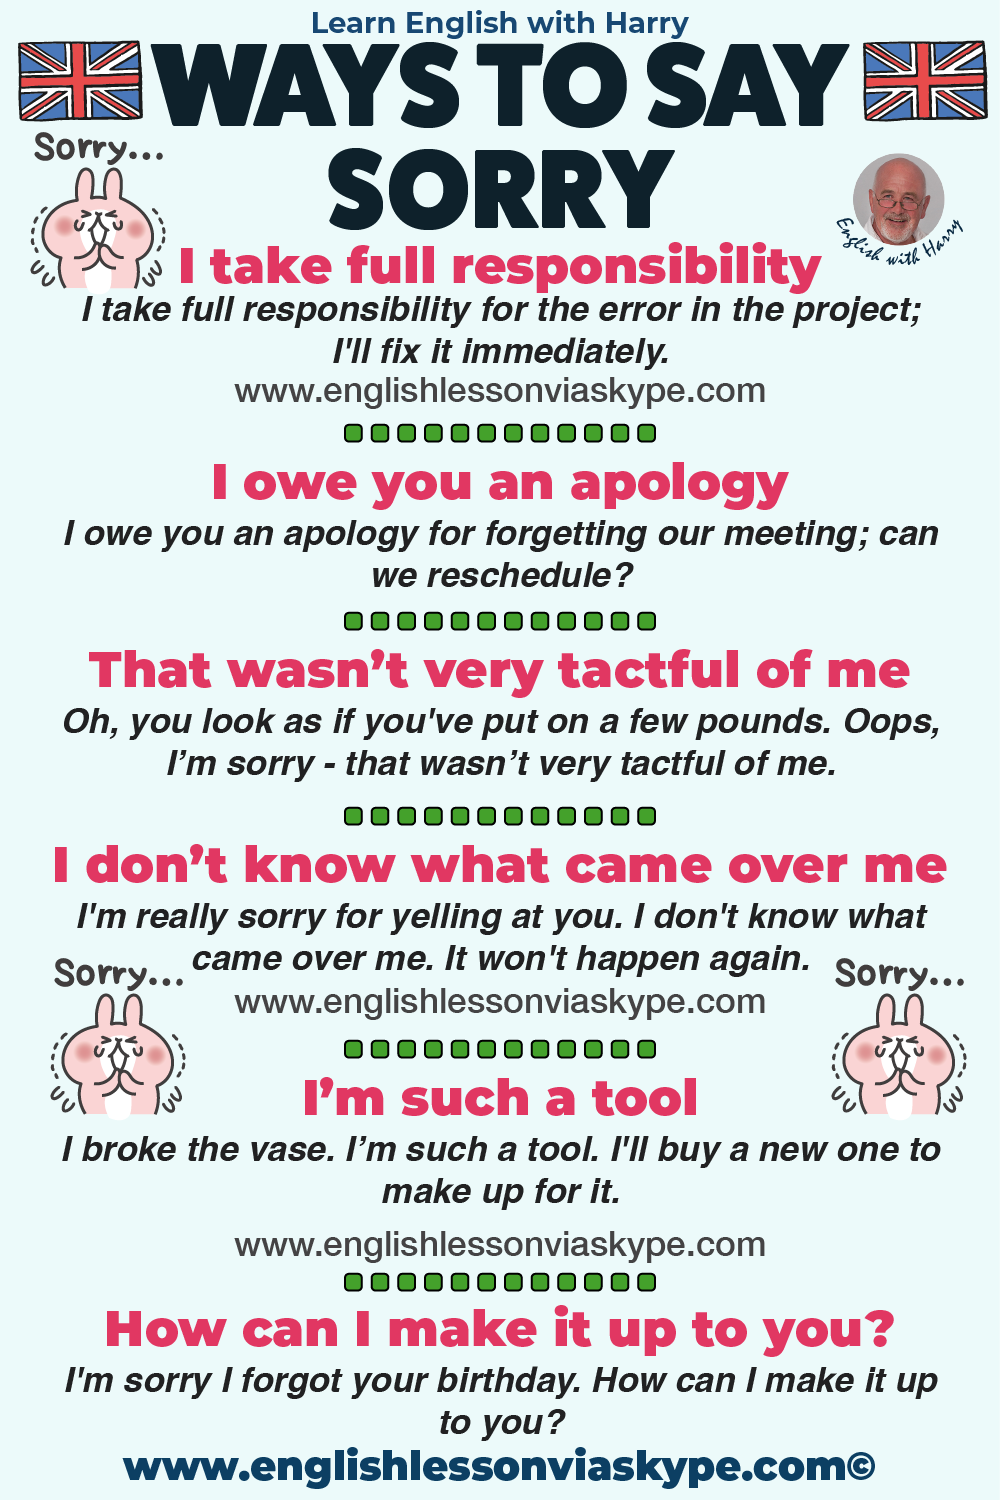 Ways to say sorry in English. English speaking skills. Improve English speaking skills. Upgrade your vocabulary. English grammar rules. Improve English speaking. Advanced English lessons on Zoom and Skype. Improve English speaking and writing skills. #learnenglish